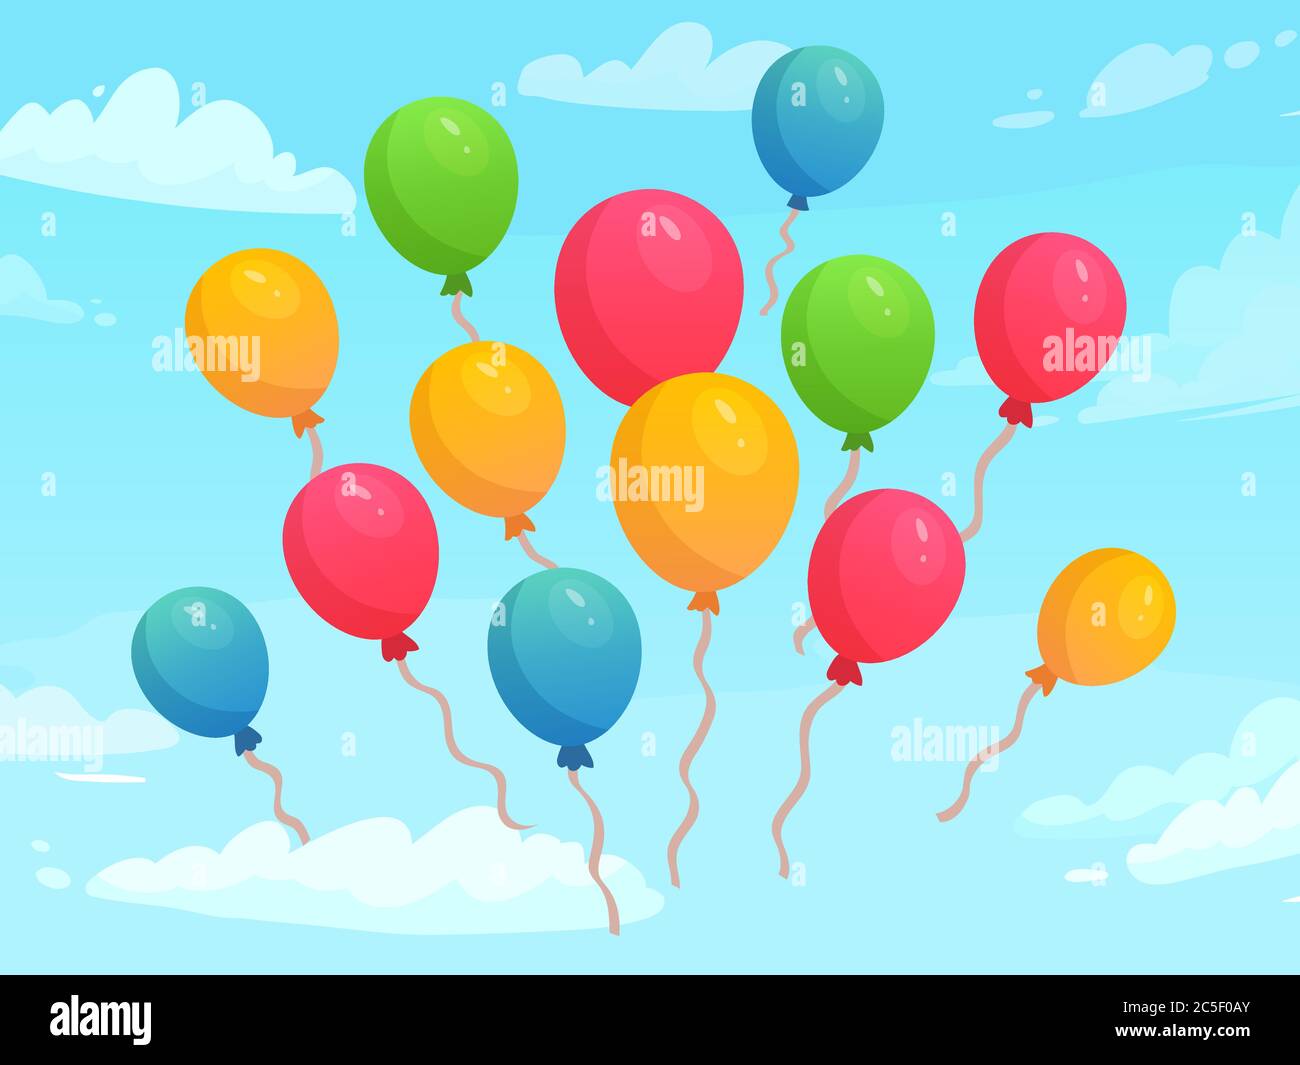 Balloons flying in sky among clouds. Colorful rubber balloons for holiday celebration. Decoration elements Stock Vector